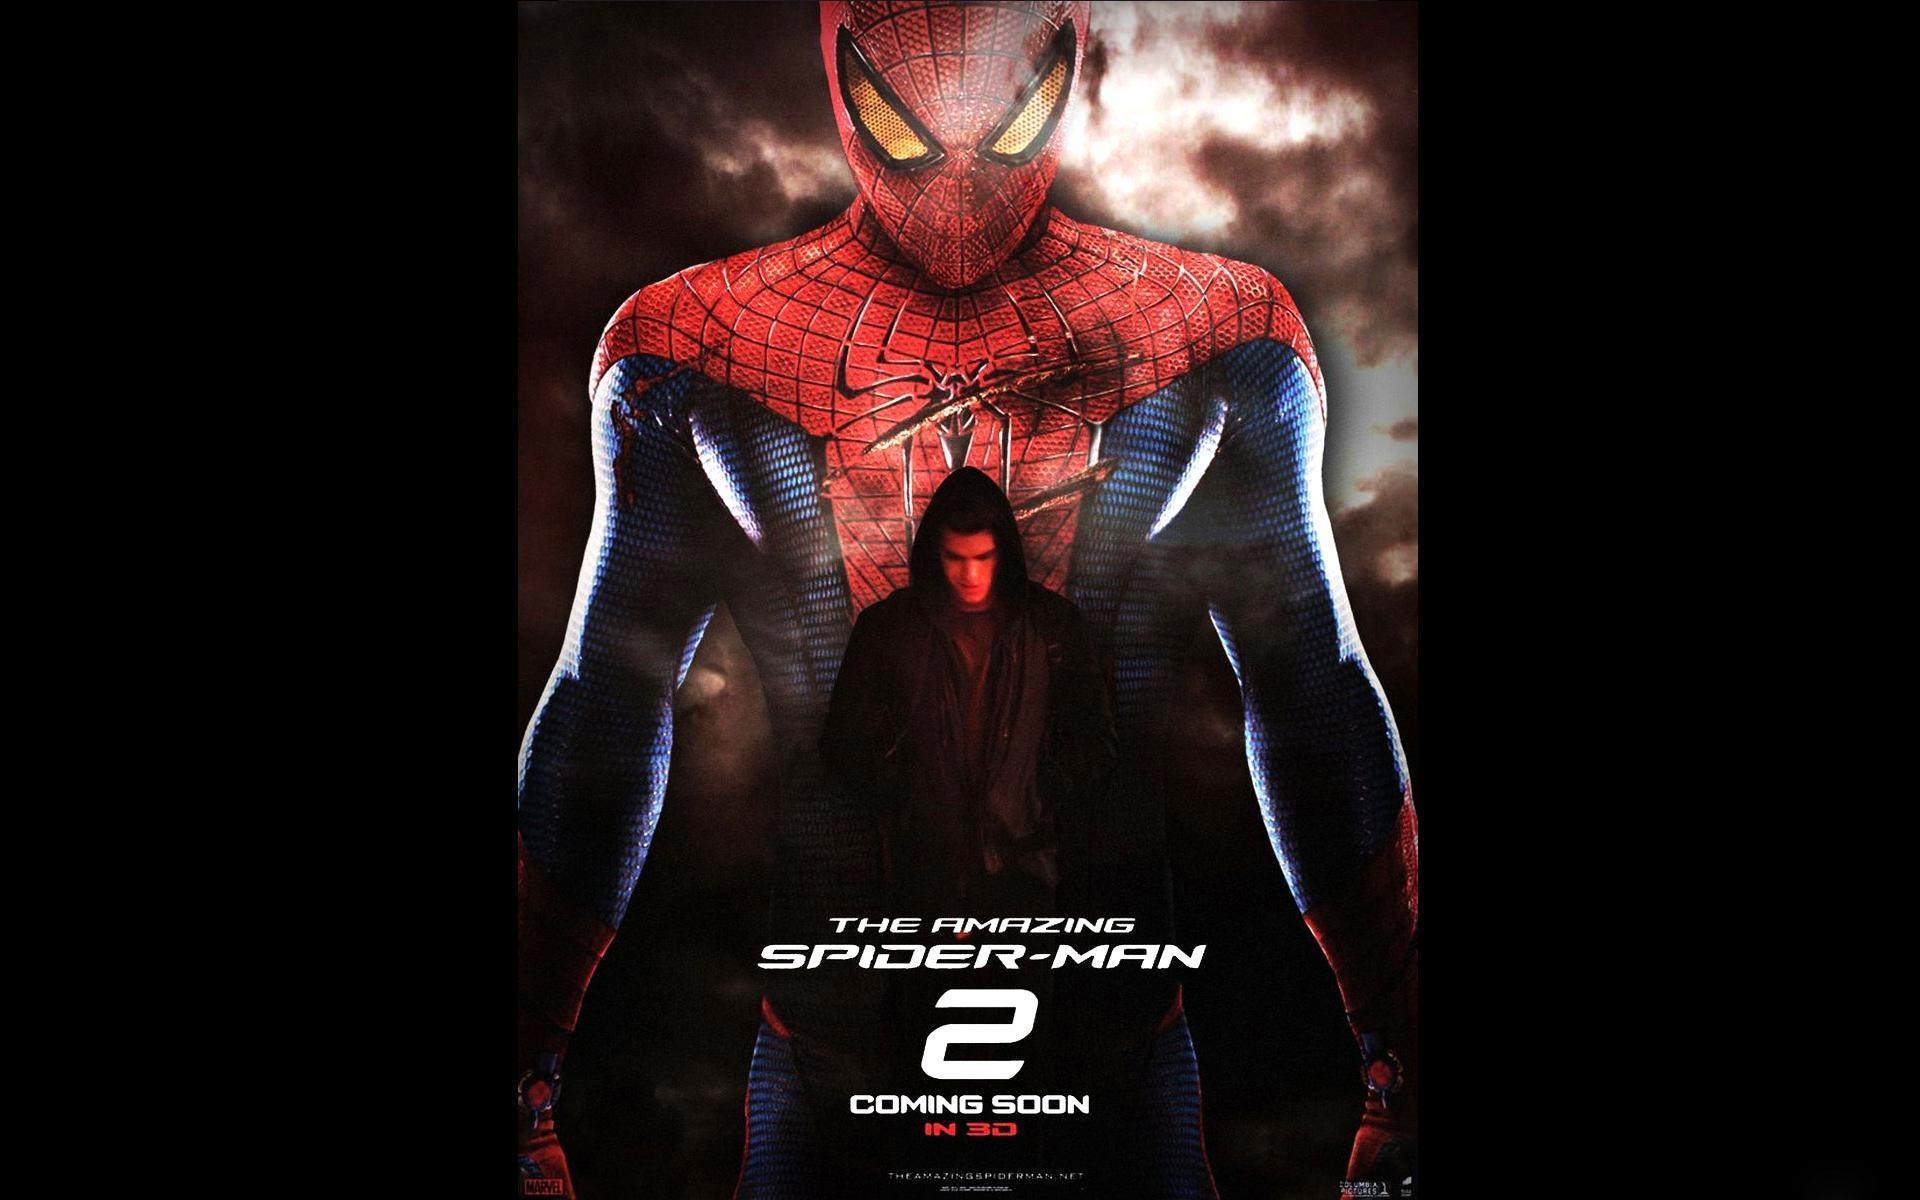 THE AMAZING SPIDER MAN 2 Wallpapers HD & iPhone 5 Wallpapers